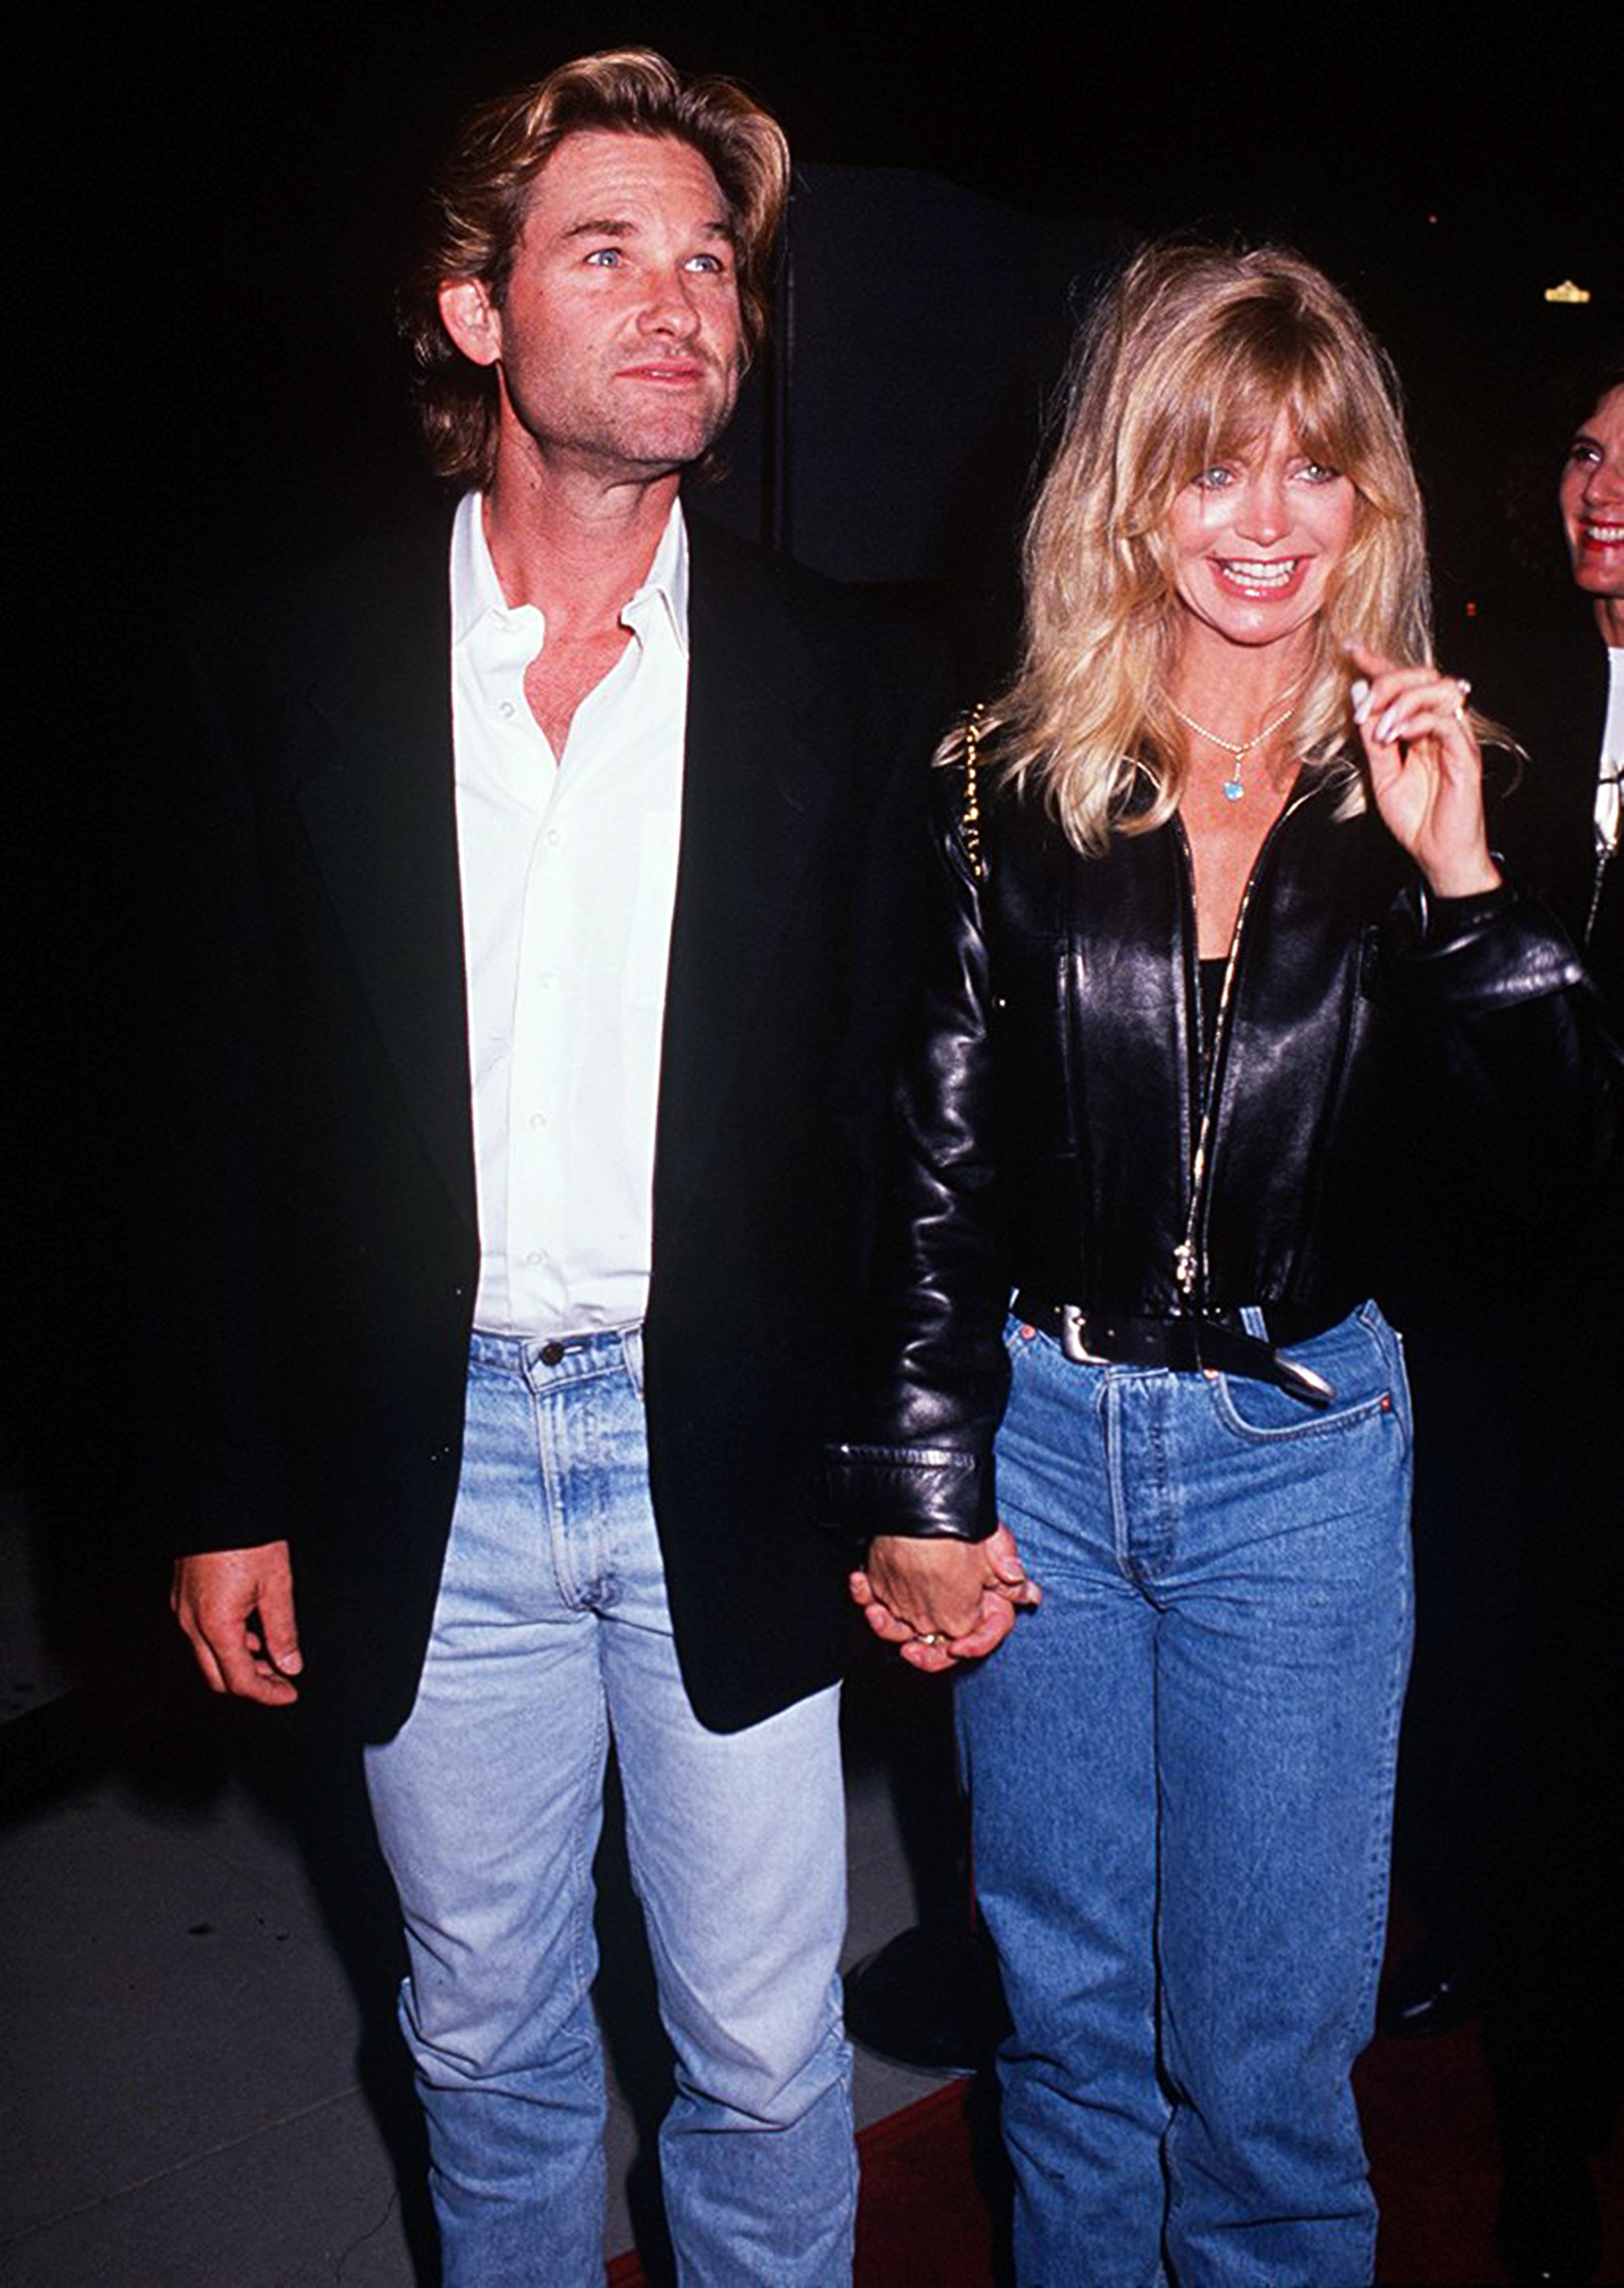 American actress Goldie Hawn with her partner, actor Kurt Russell at the "Housesitter" Beverly Hills premiere at the Academy Theatre on June 9,1992 in Beverly Hills, California | Photo: Getty Images